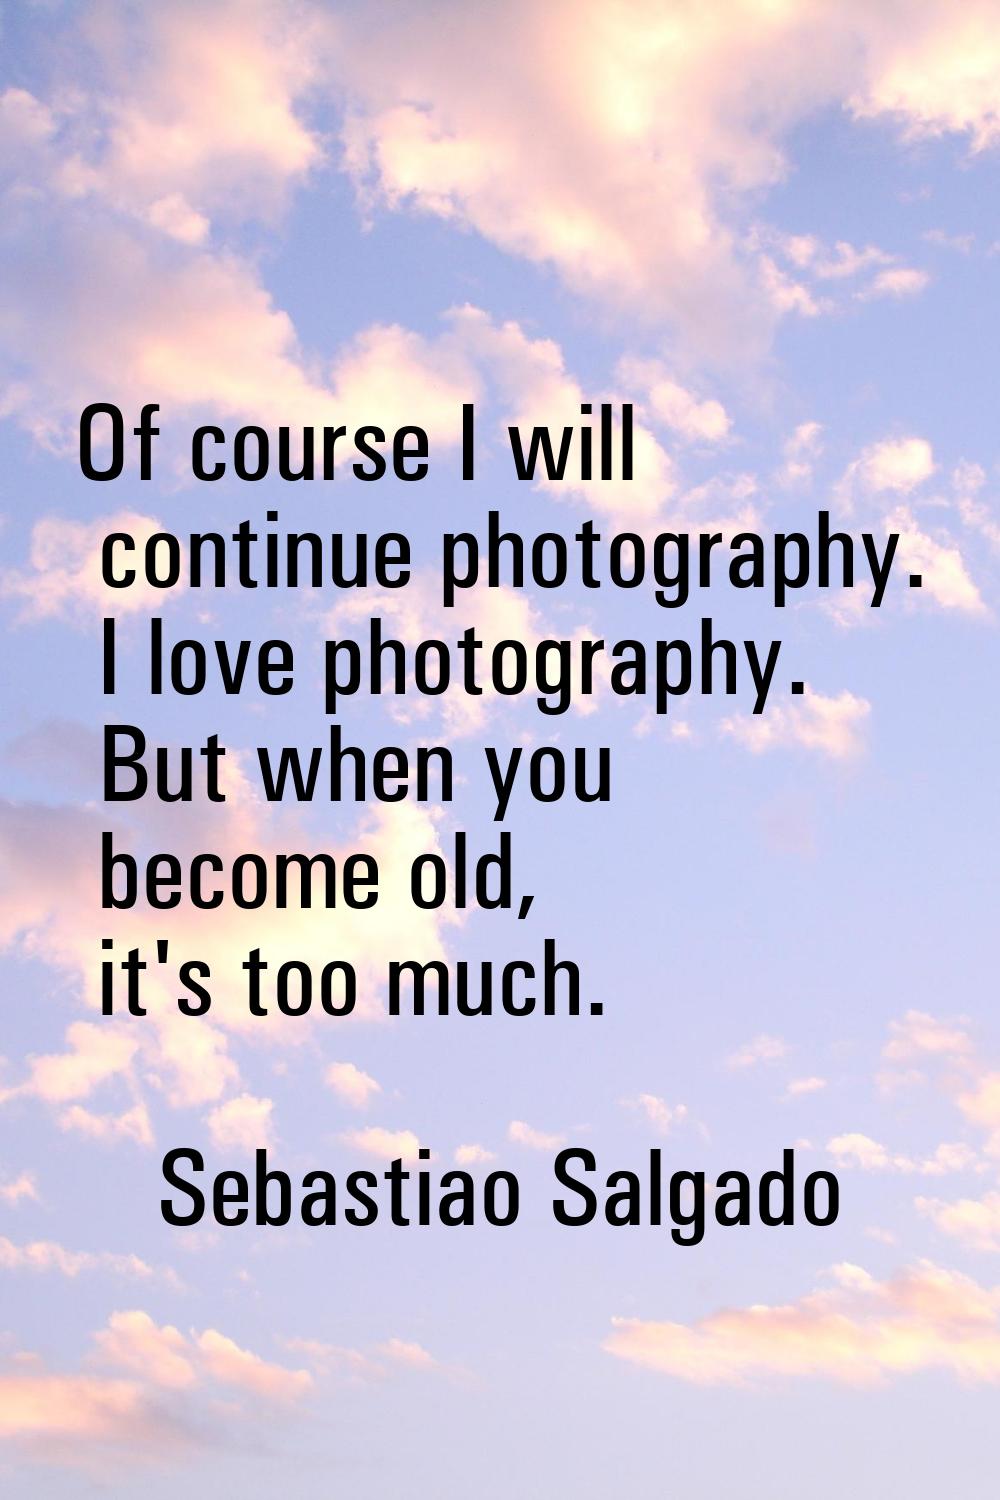 Of course I will continue photography. I love photography. But when you become old, it's too much.